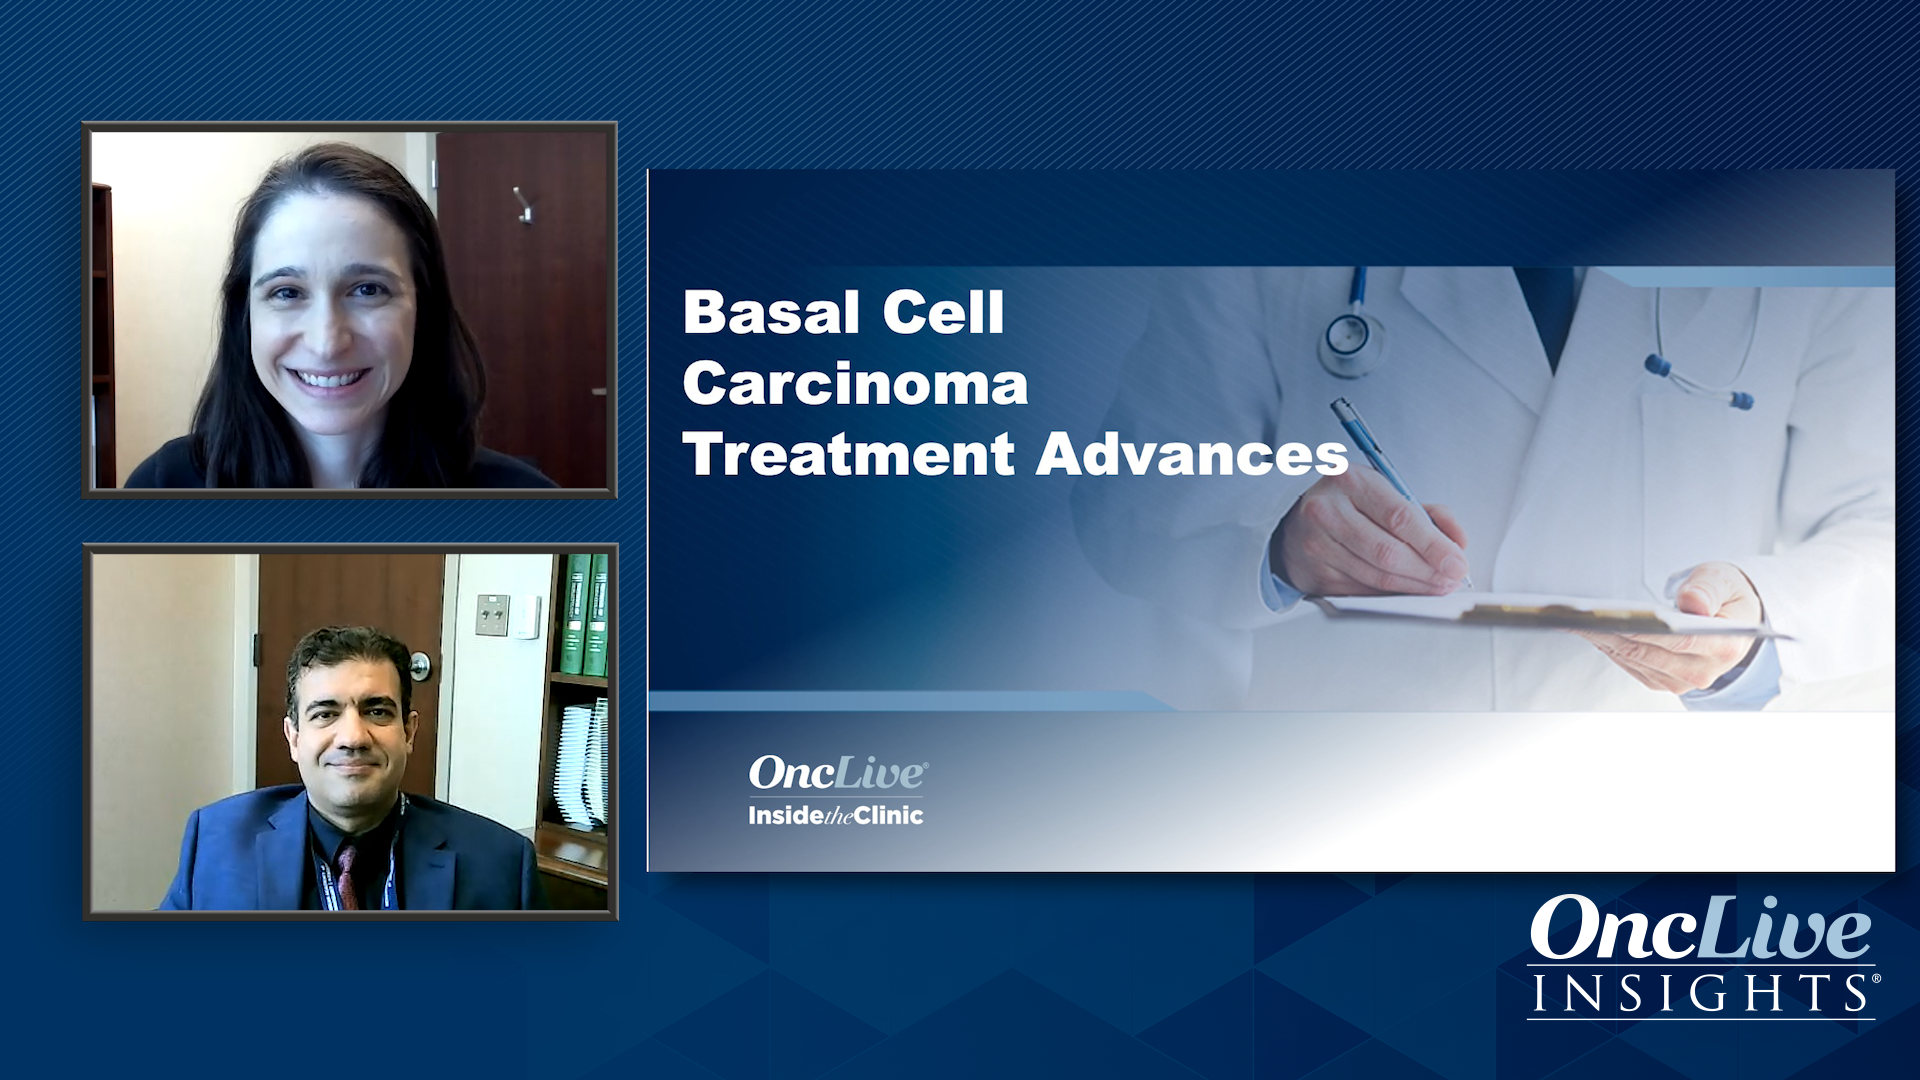 Safety of Cemiplimab for Basal Cell Carcinoma